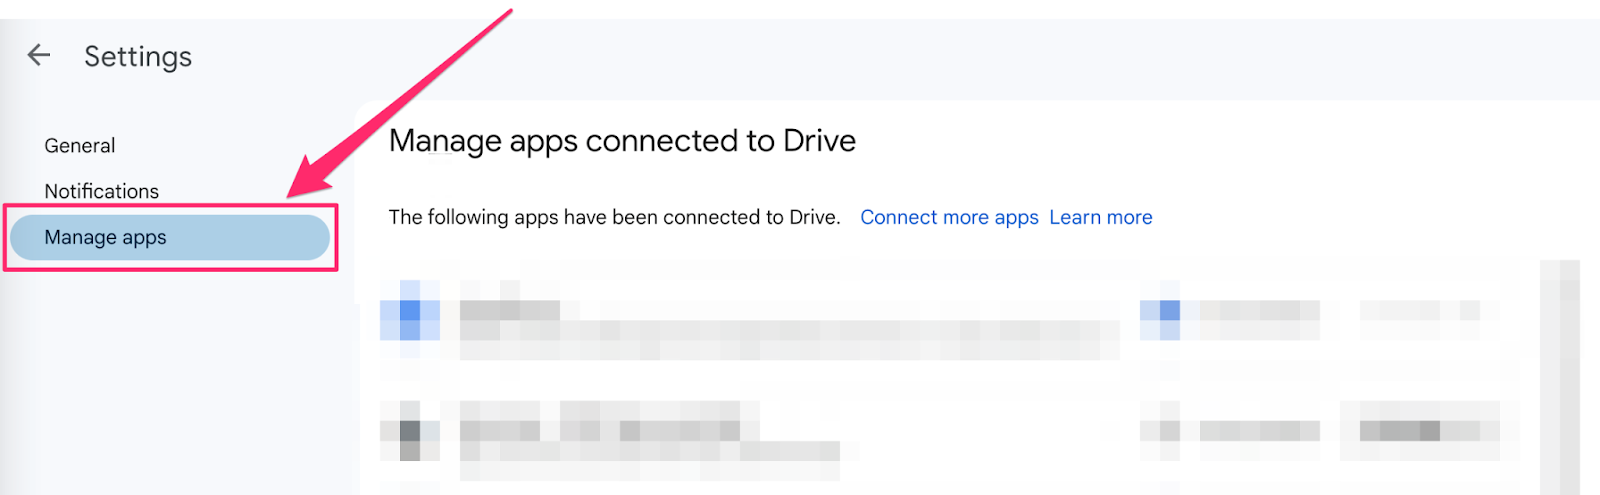 Google Drive - Manage Apps